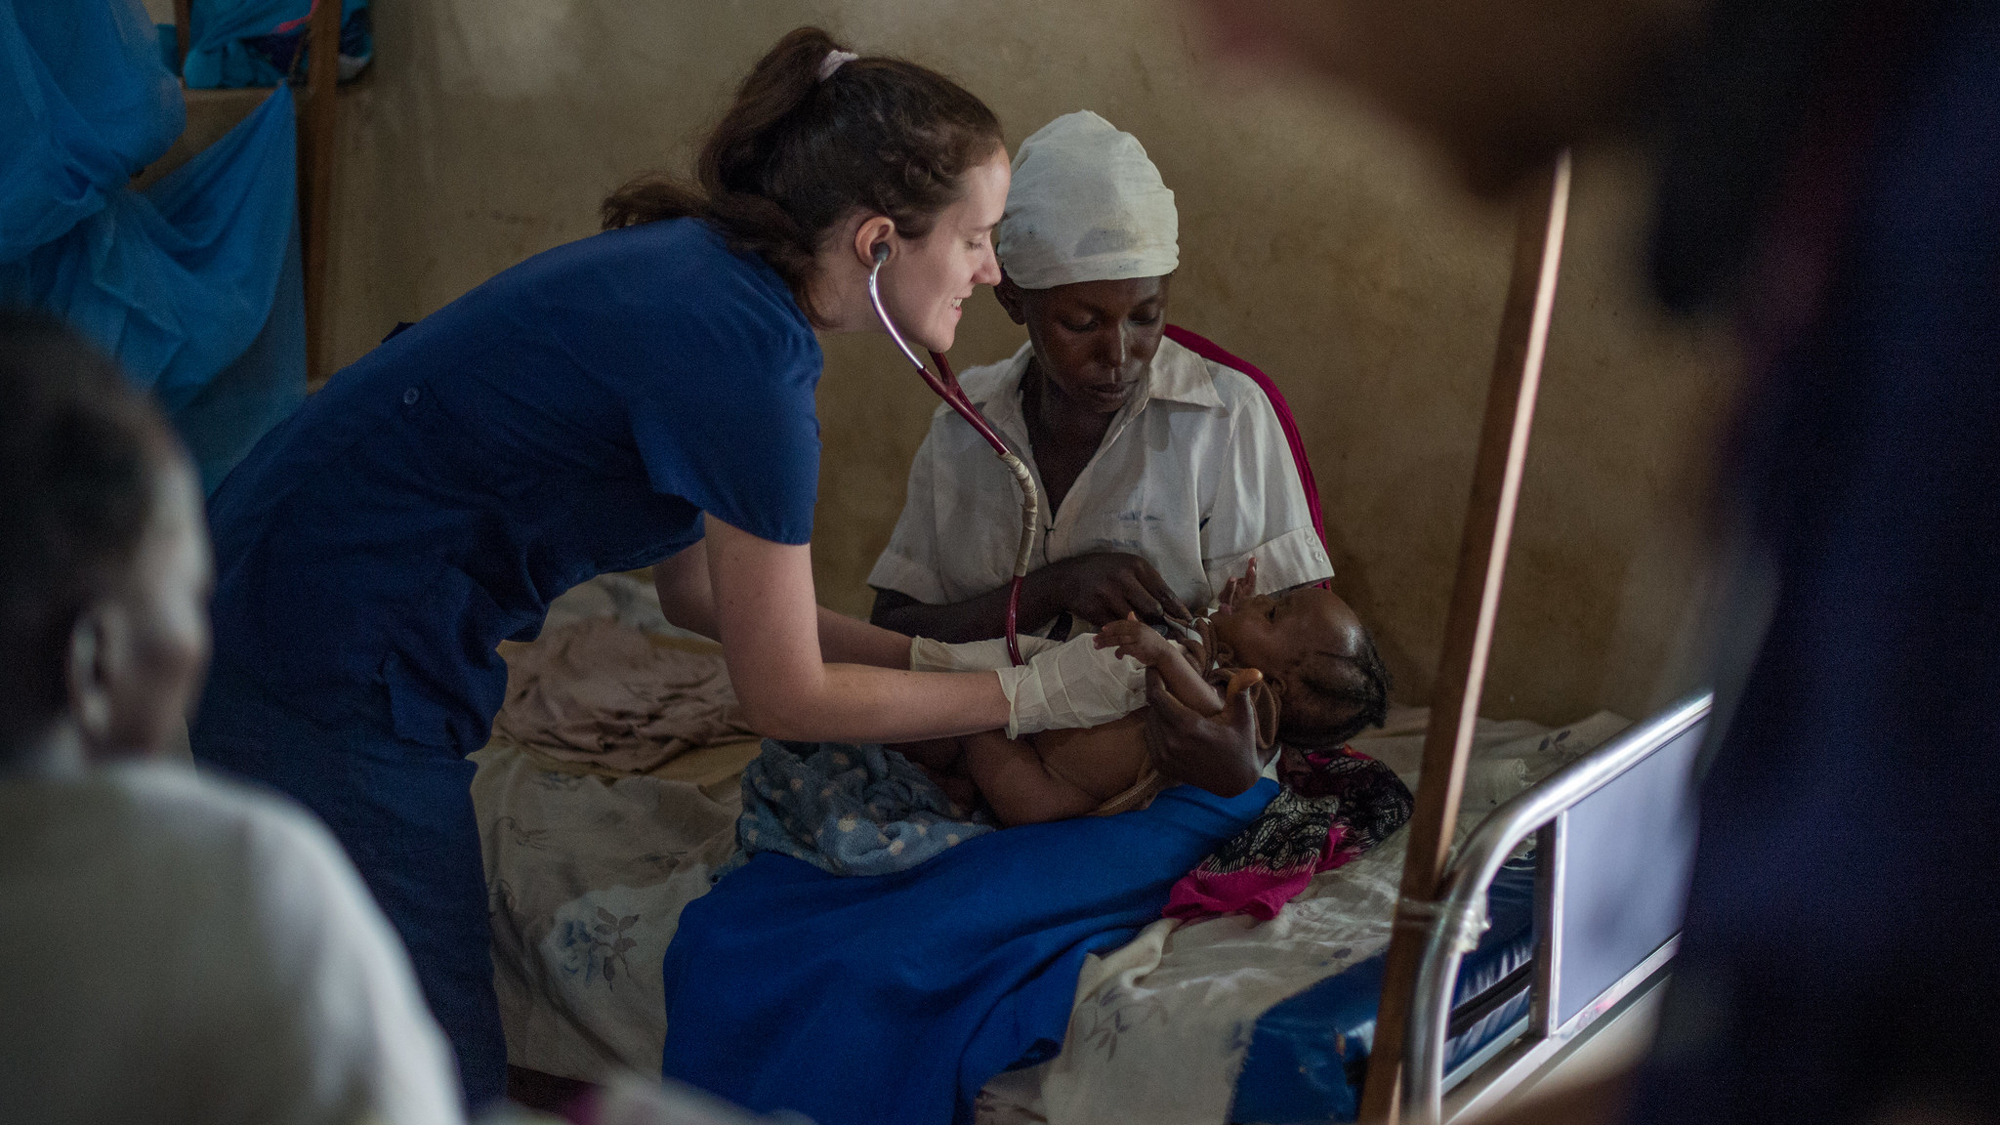 Sarah Rubino servers a mother and child in south sudan_June2022